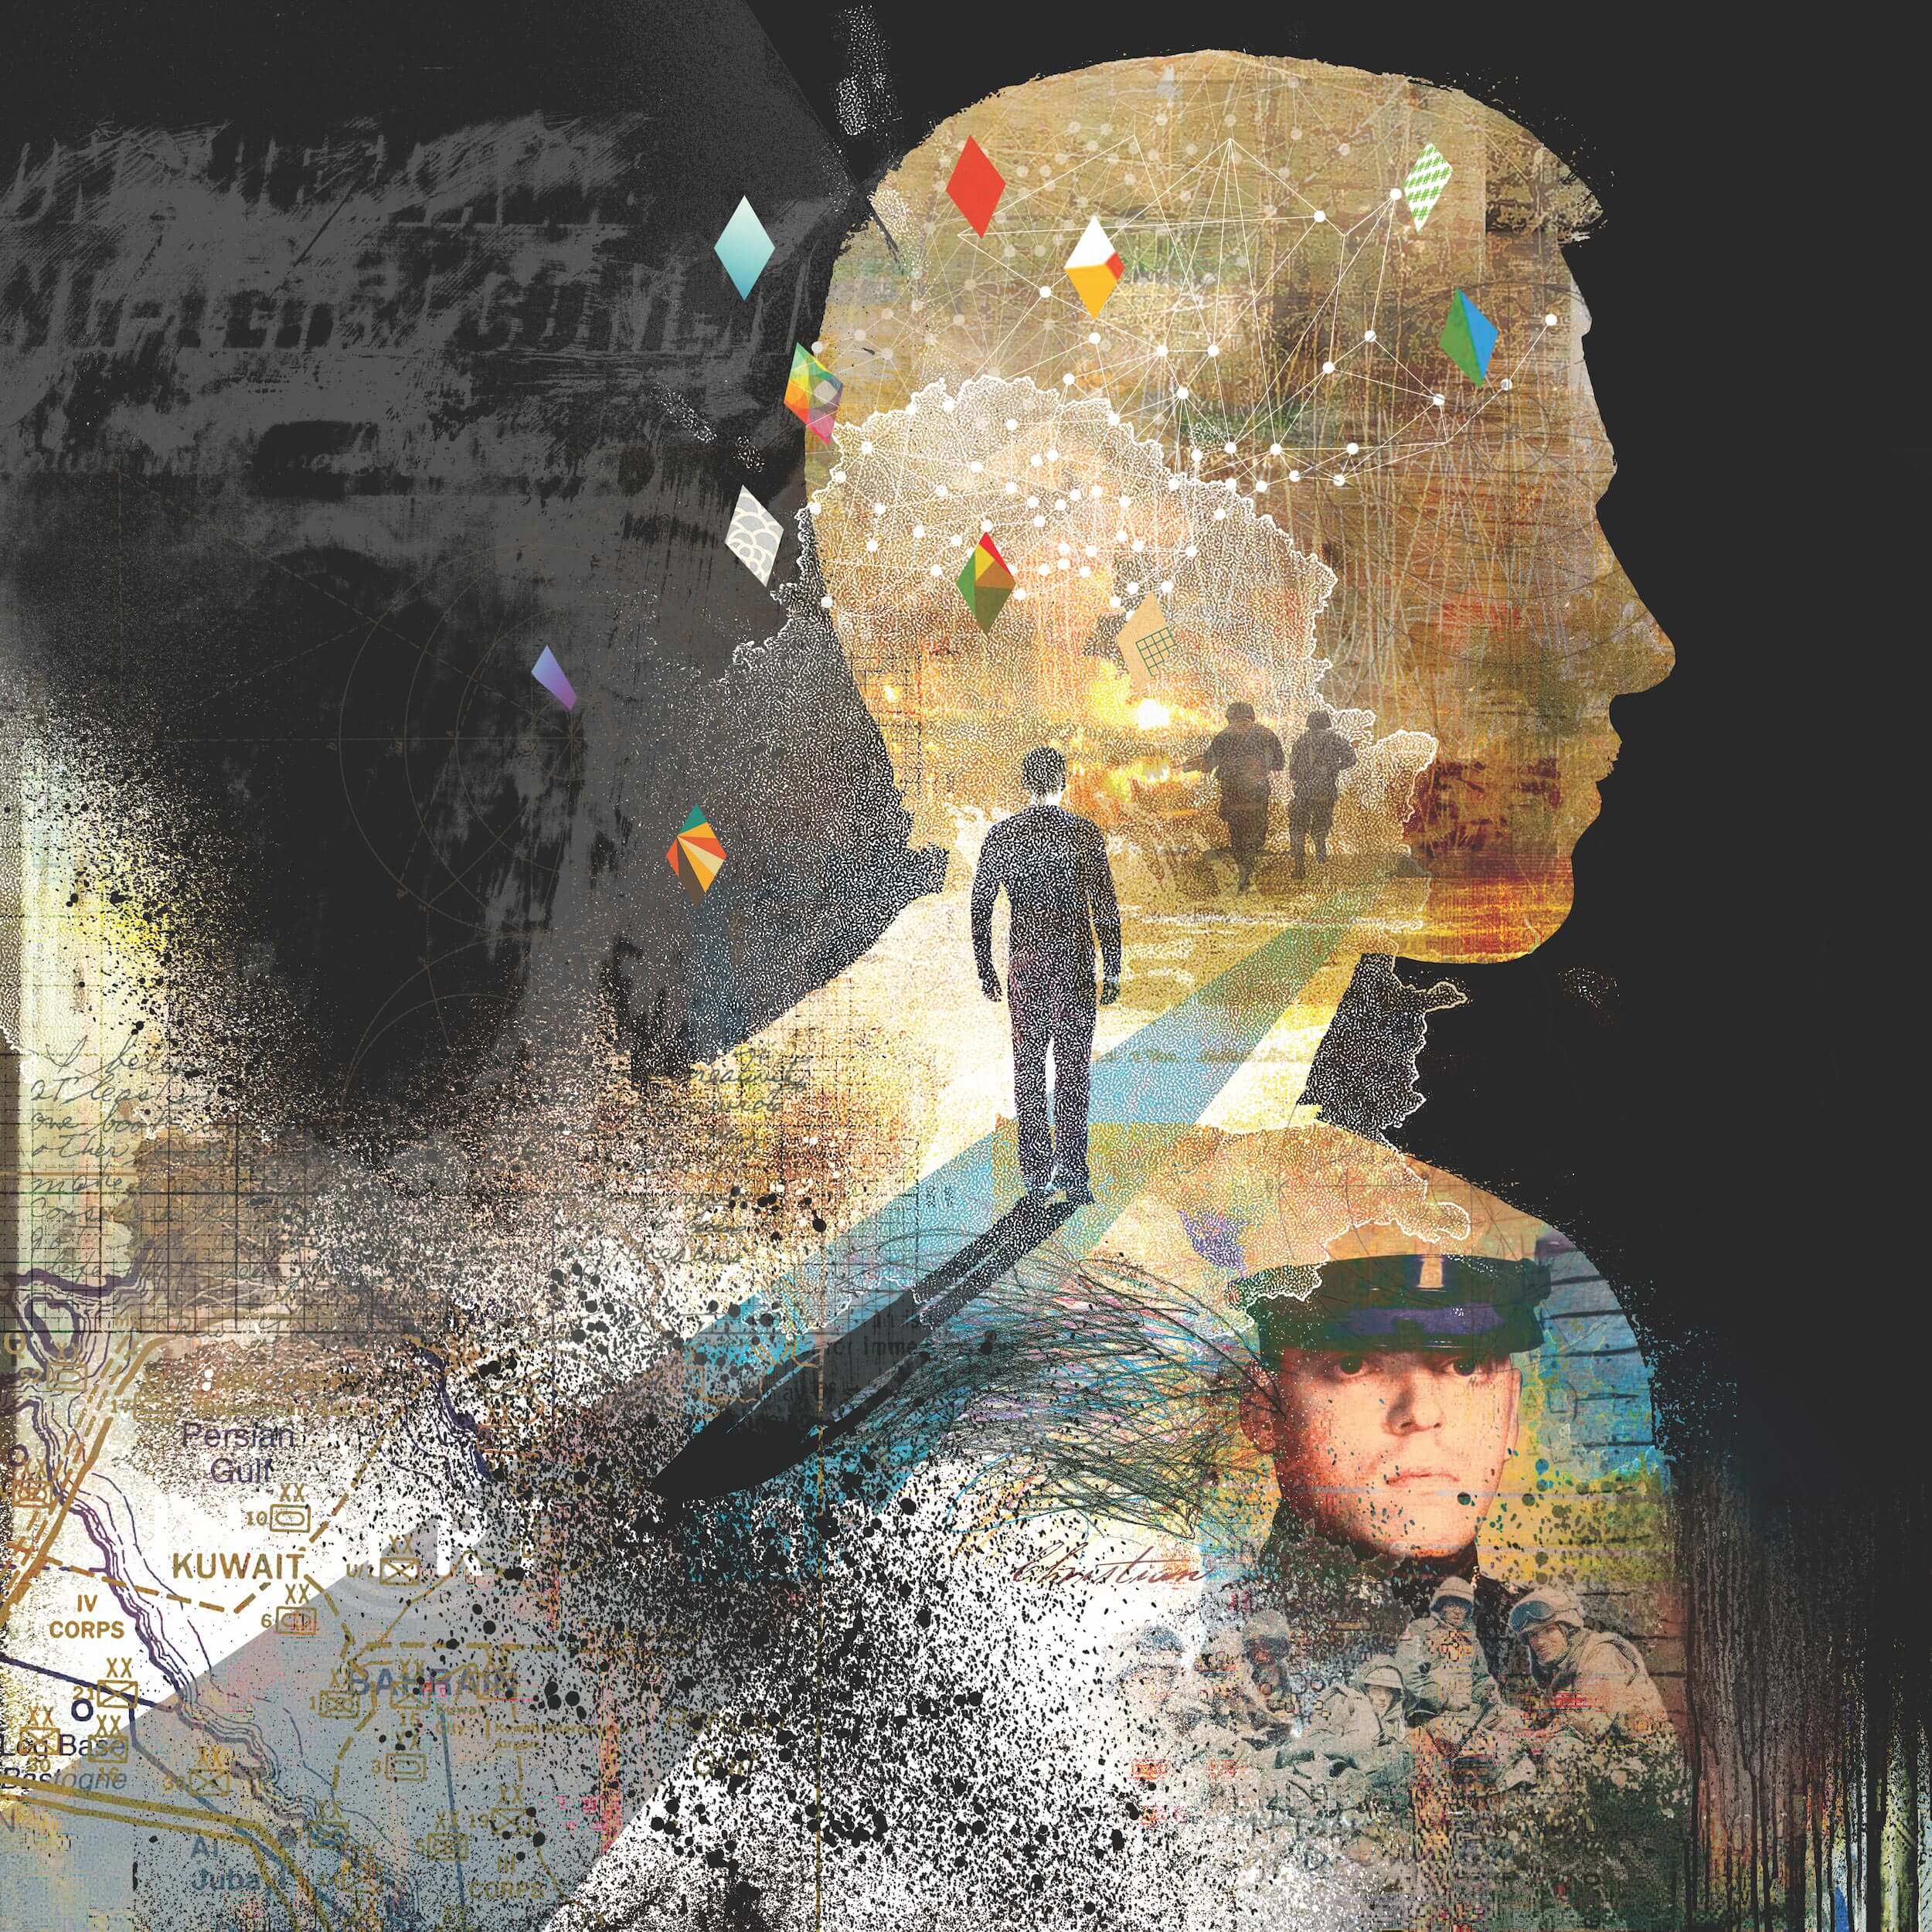 An illustration depicting the inner-turmoil of a soldier with PTSD